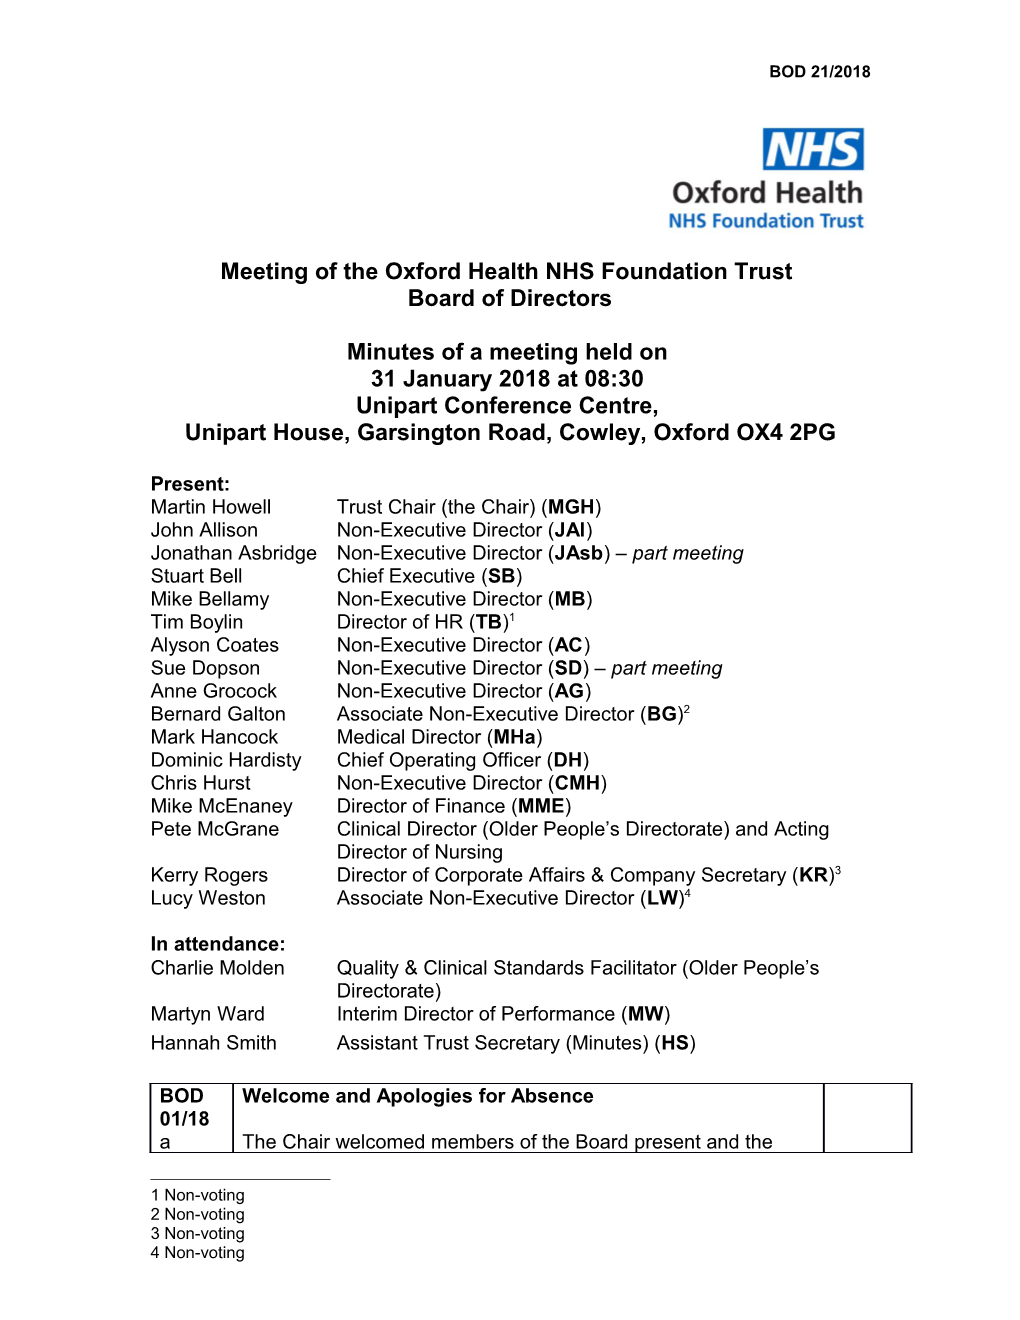 Meeting of the Oxford Health NHS Foundation Trust